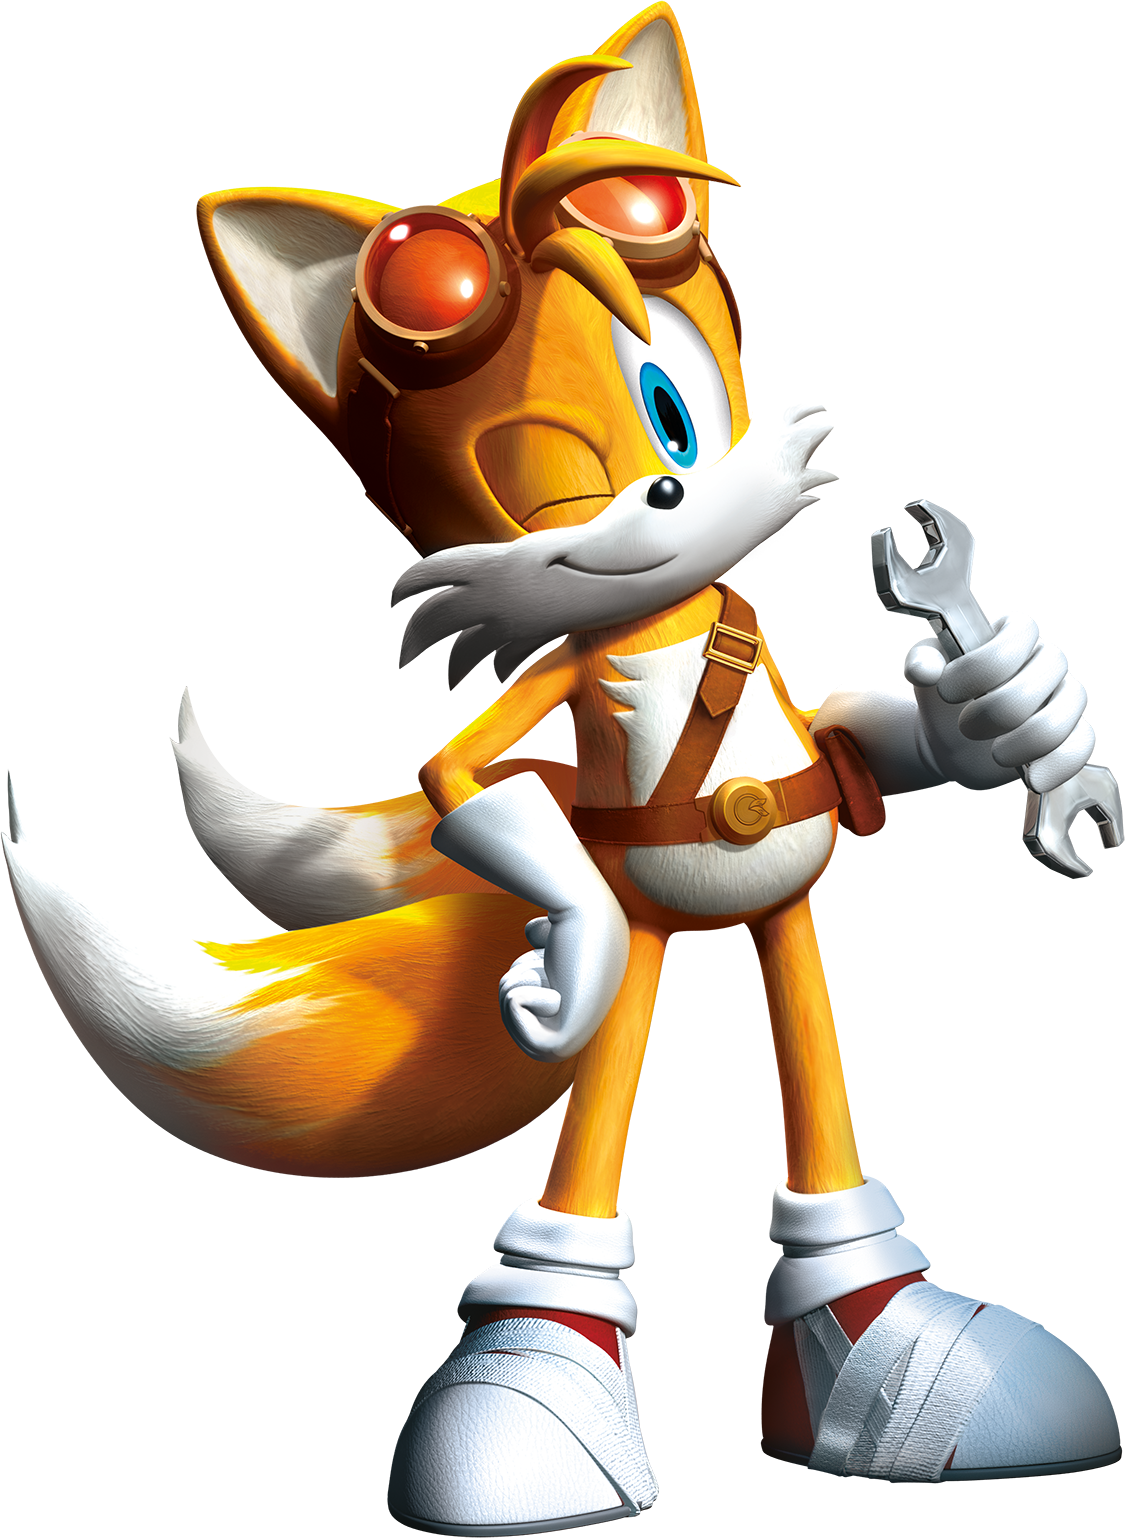 ❤❤ TAILS THE FOX ❤❤